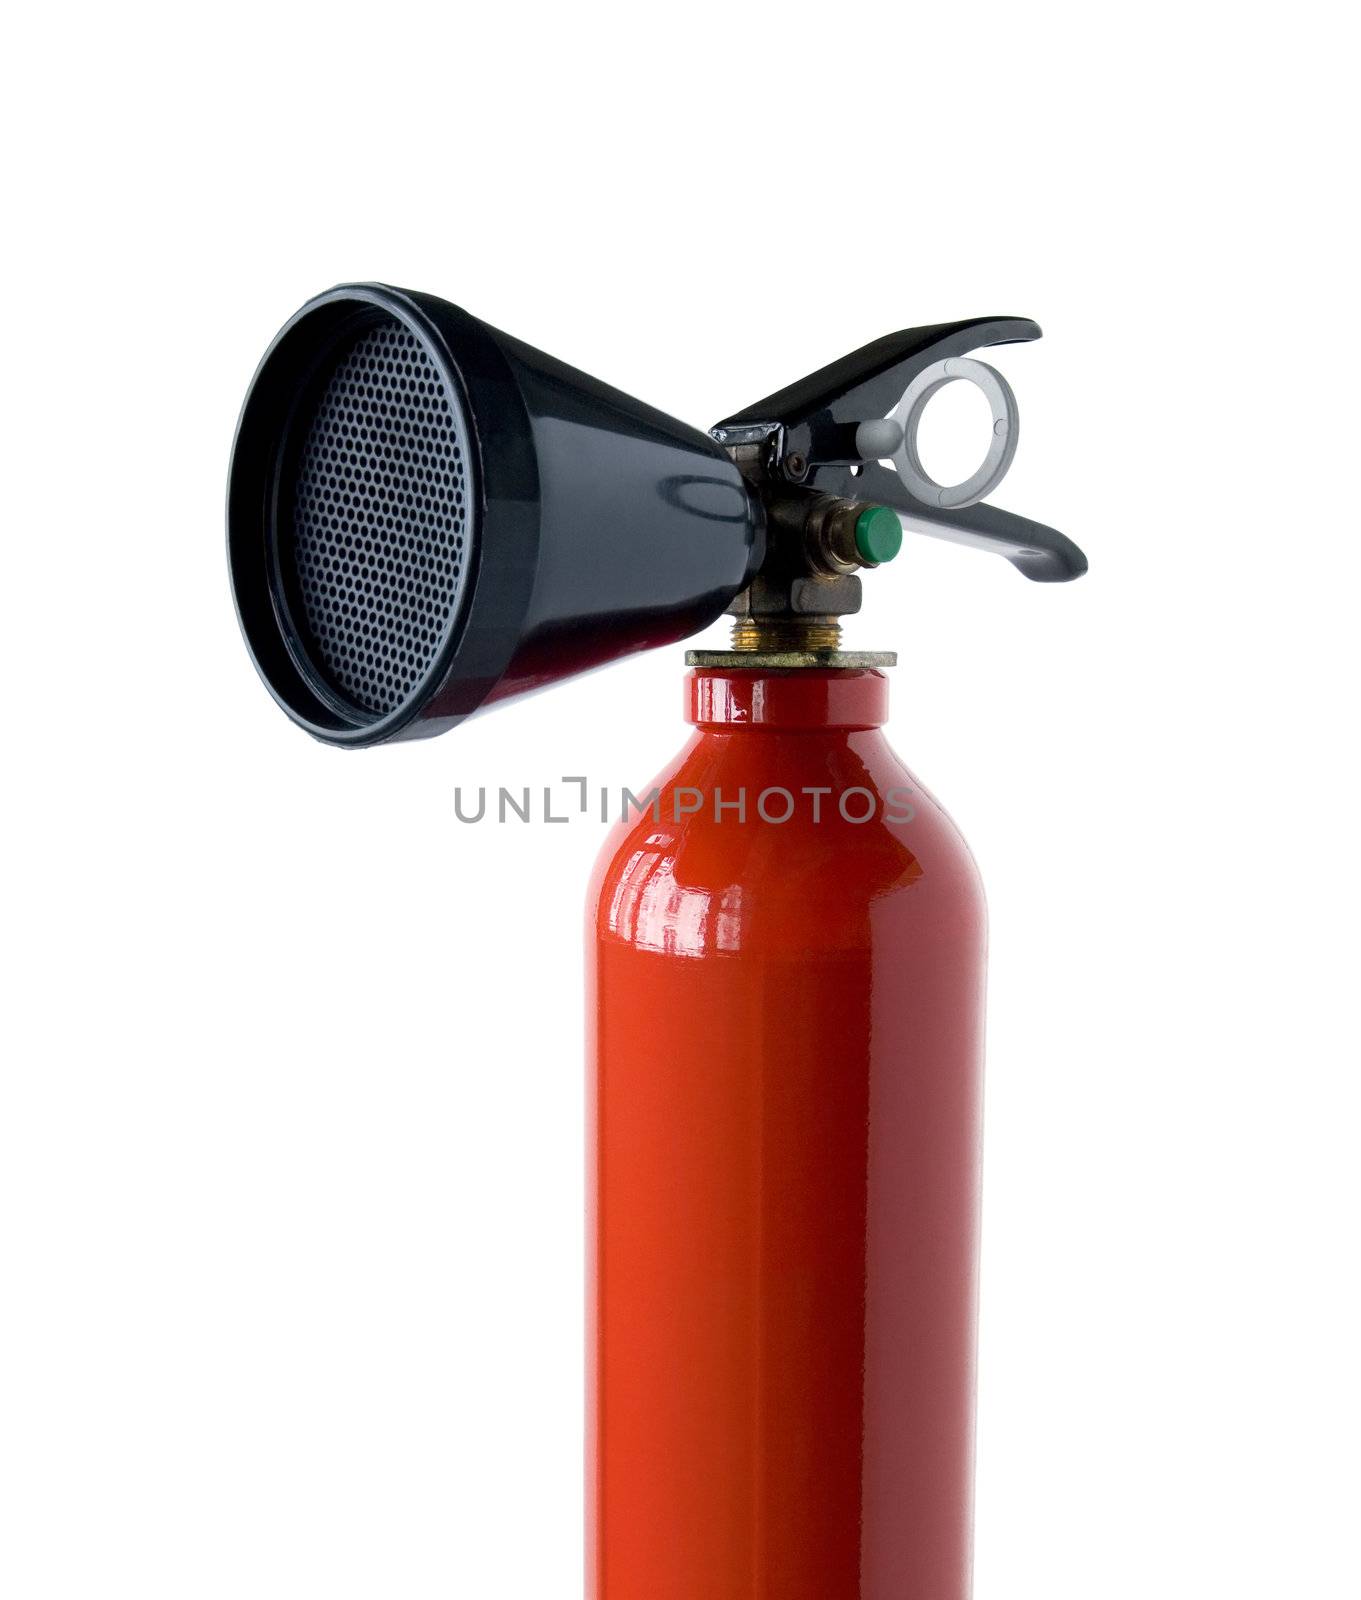 Fire extinguisher by daboost